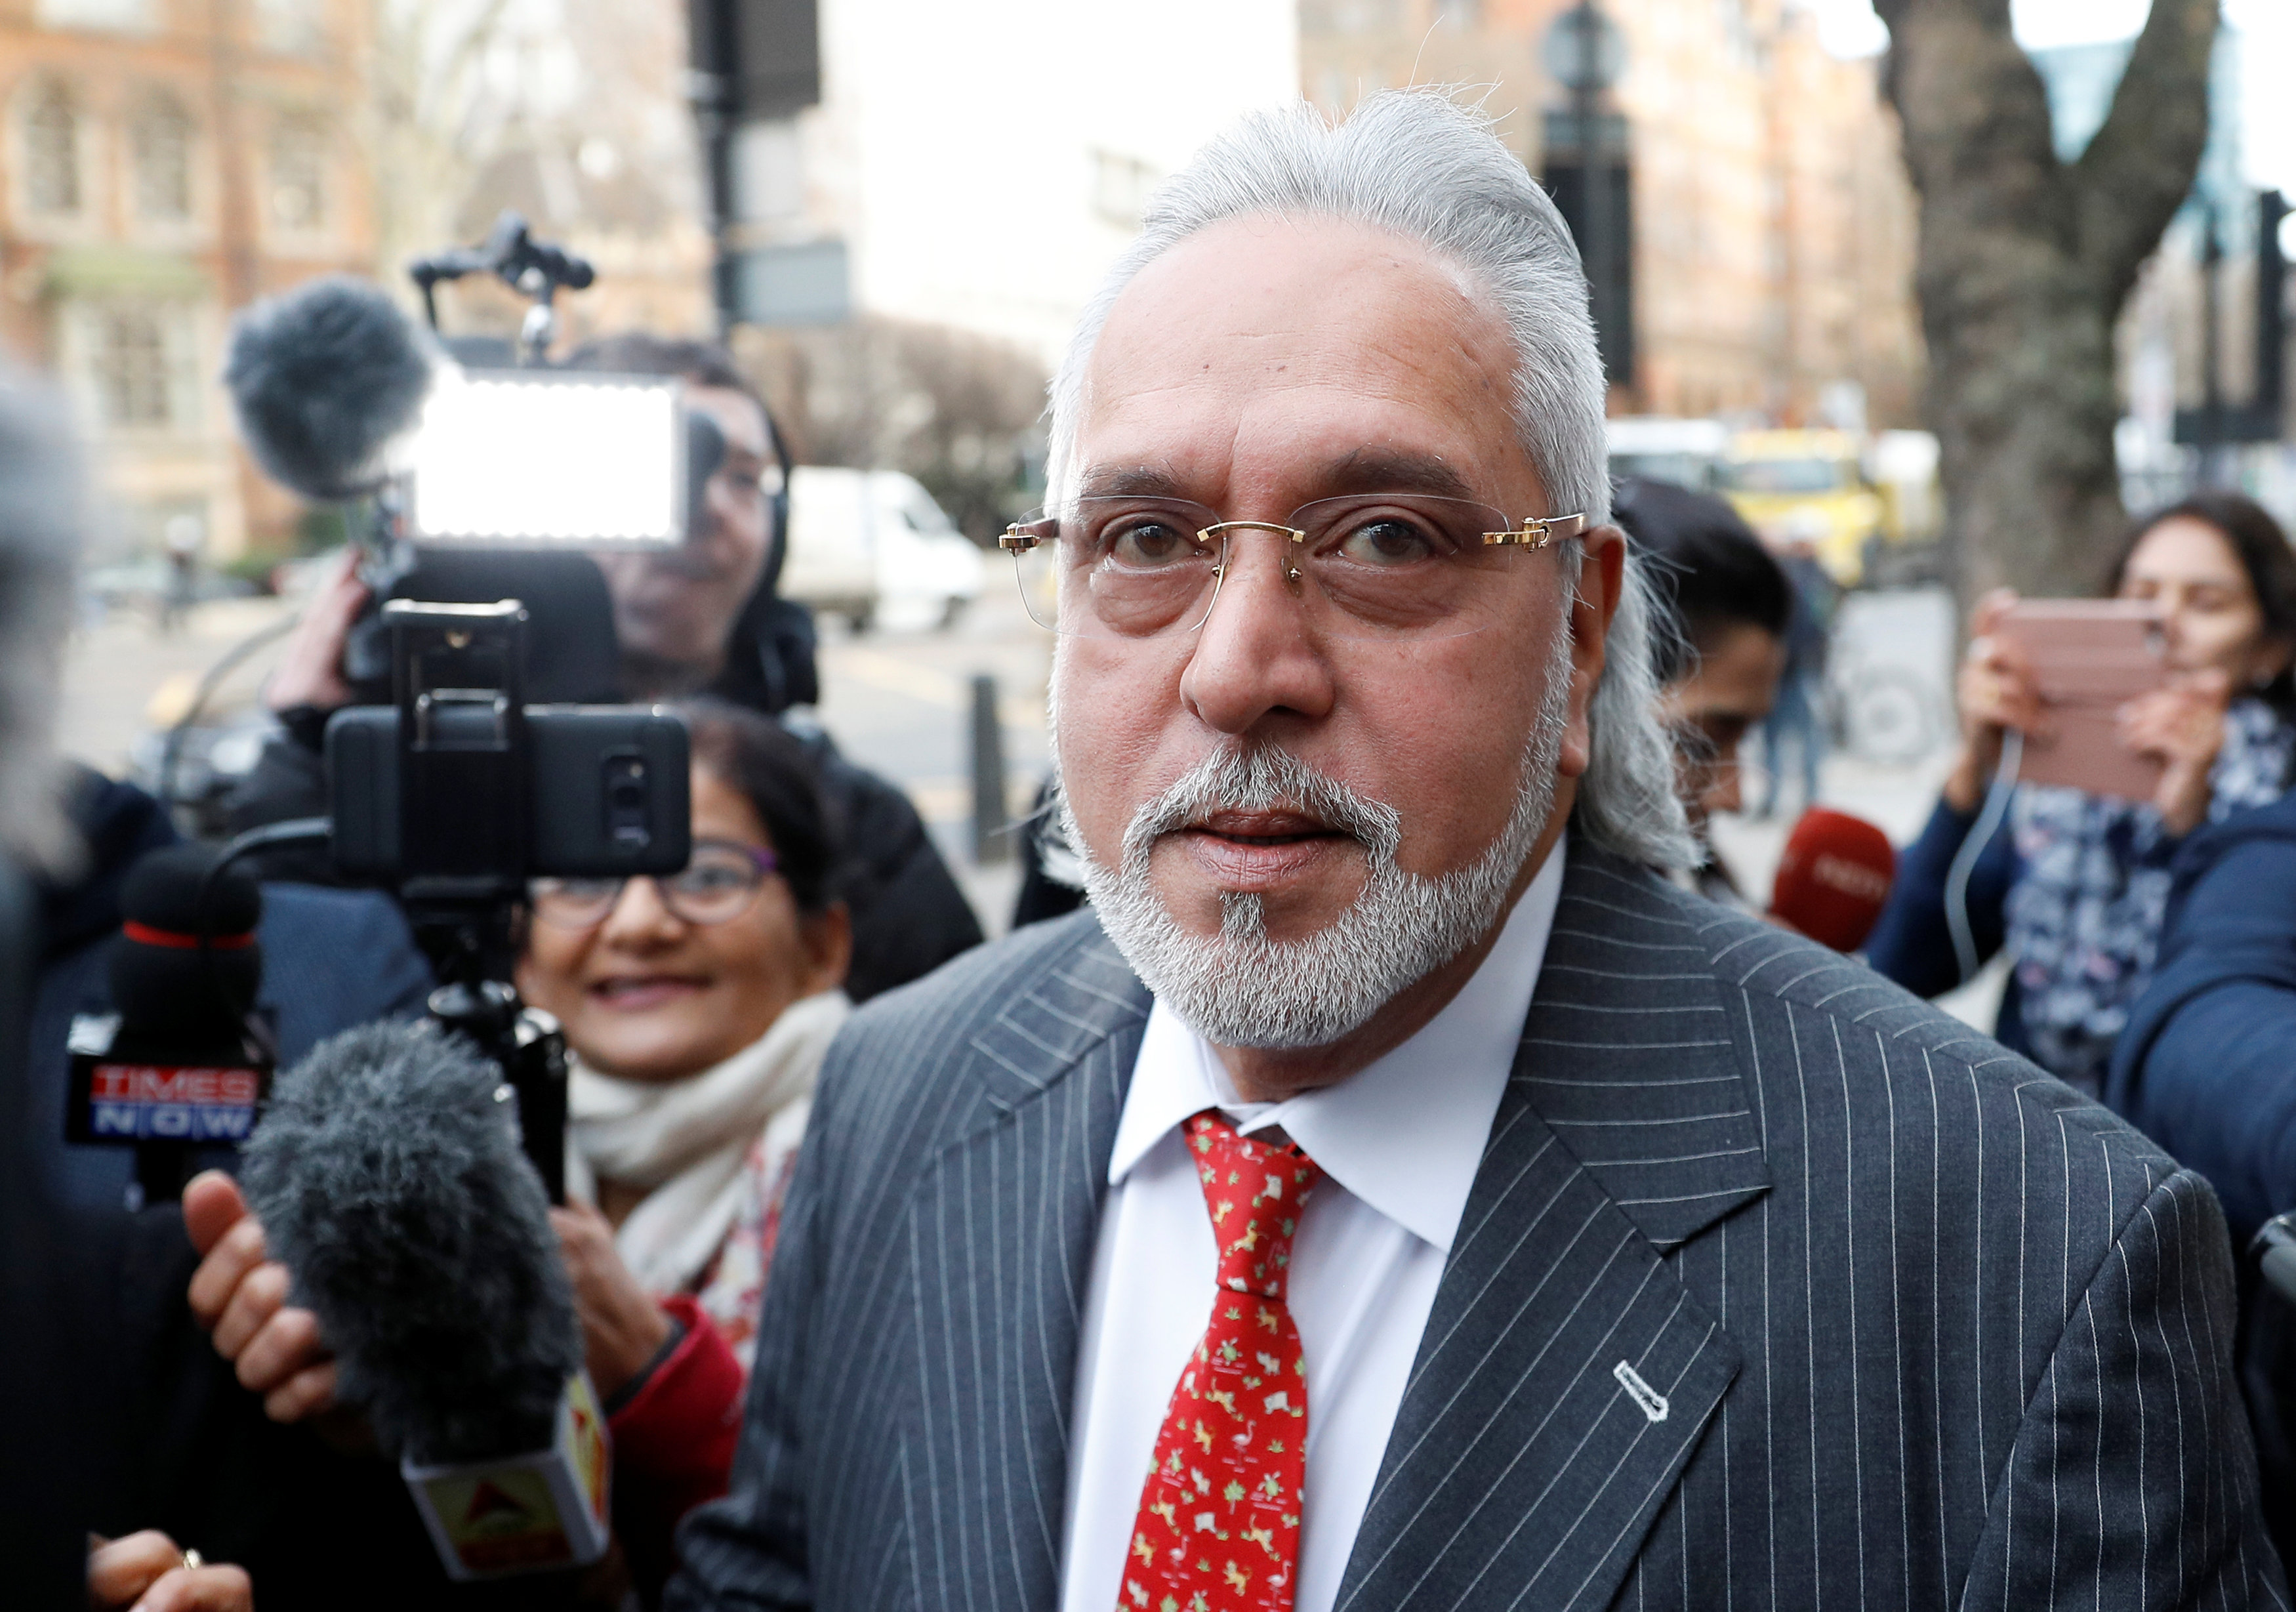 Vijay Mallya arrives to face an extradition request by India at Westminster Magistrates Court, in London, Britain, December 10, 2018. REUTERS